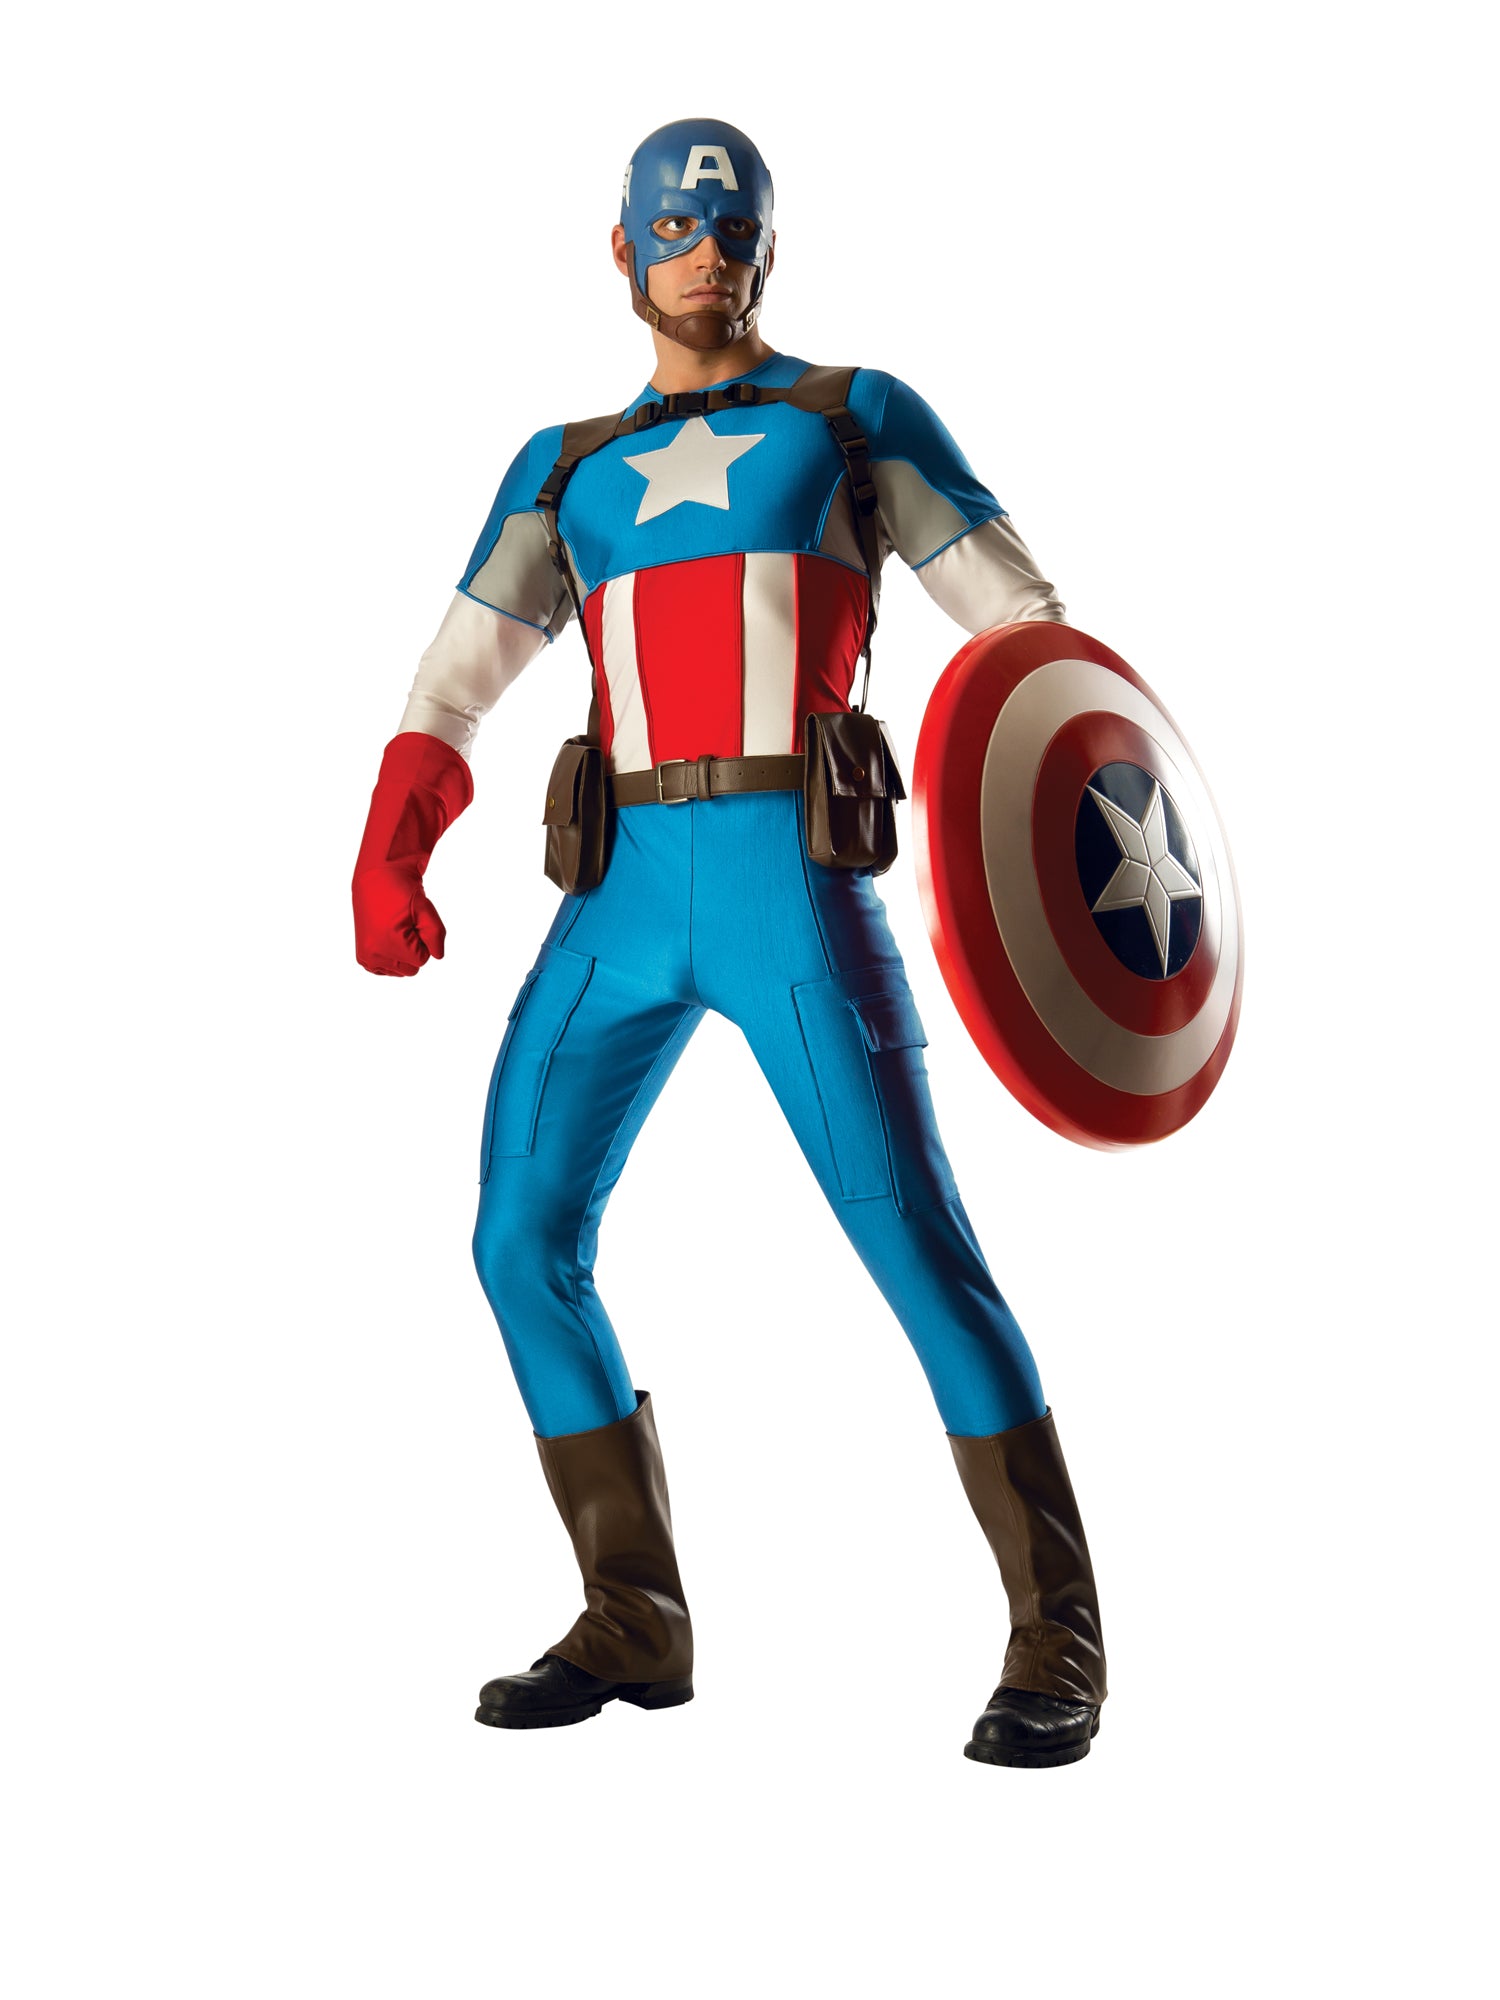 Captain America, Avengers, Multi, Marvel, Adult Costume, Extra Large, Front